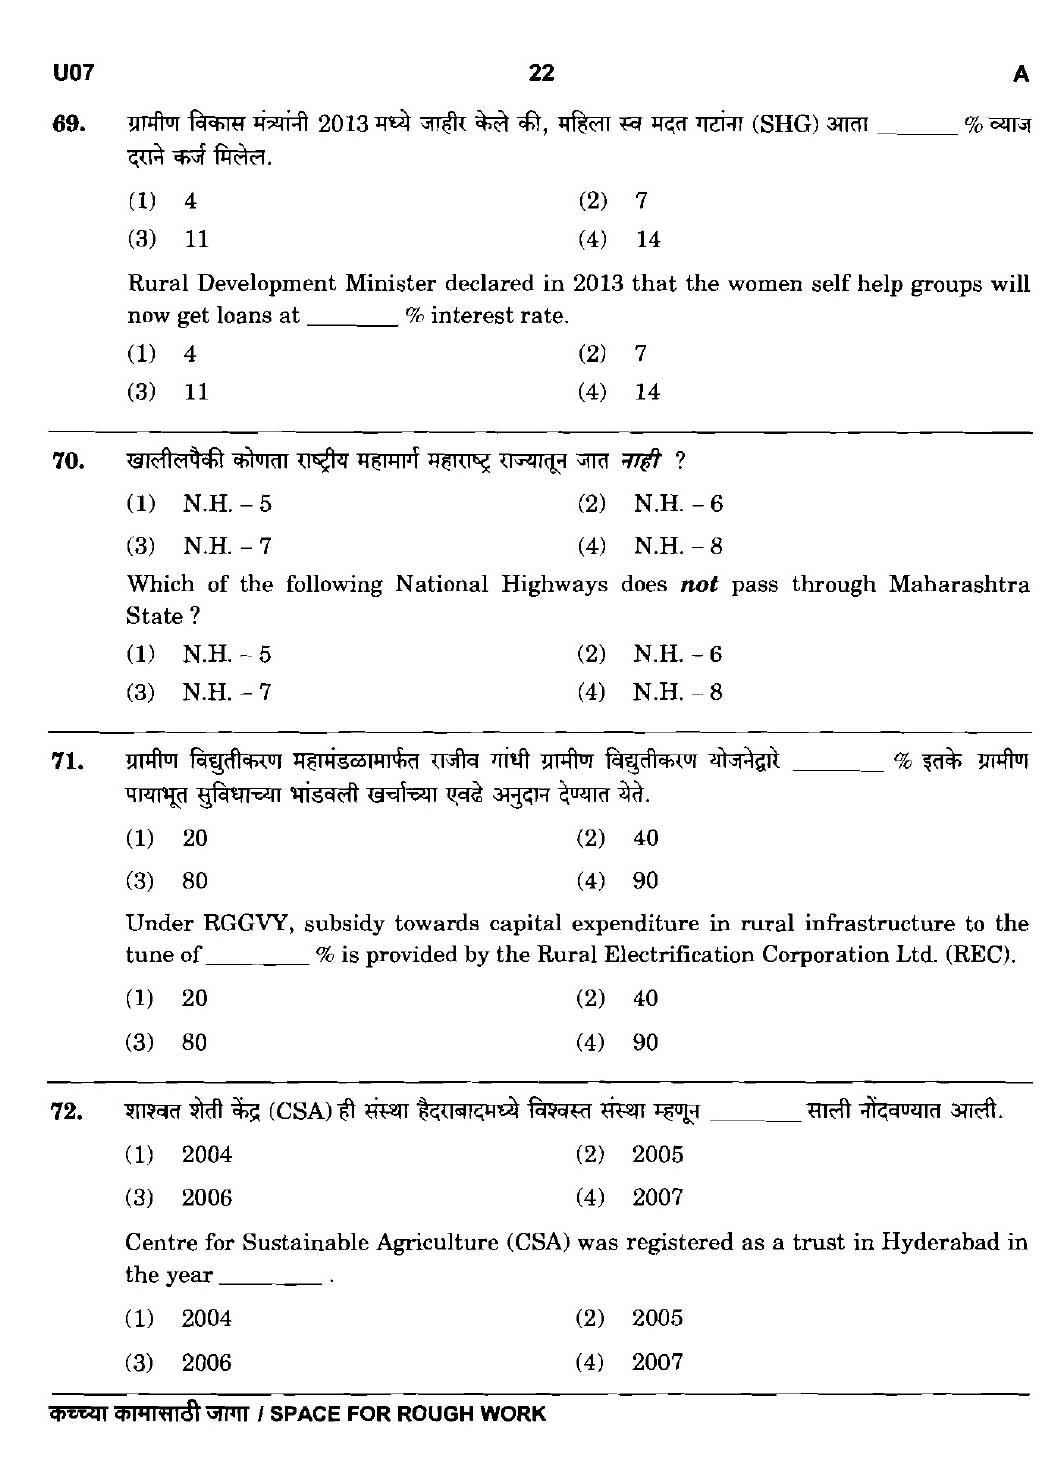 MPSC Agricultural Services Preliminary Exam 2016 Question Paper 21